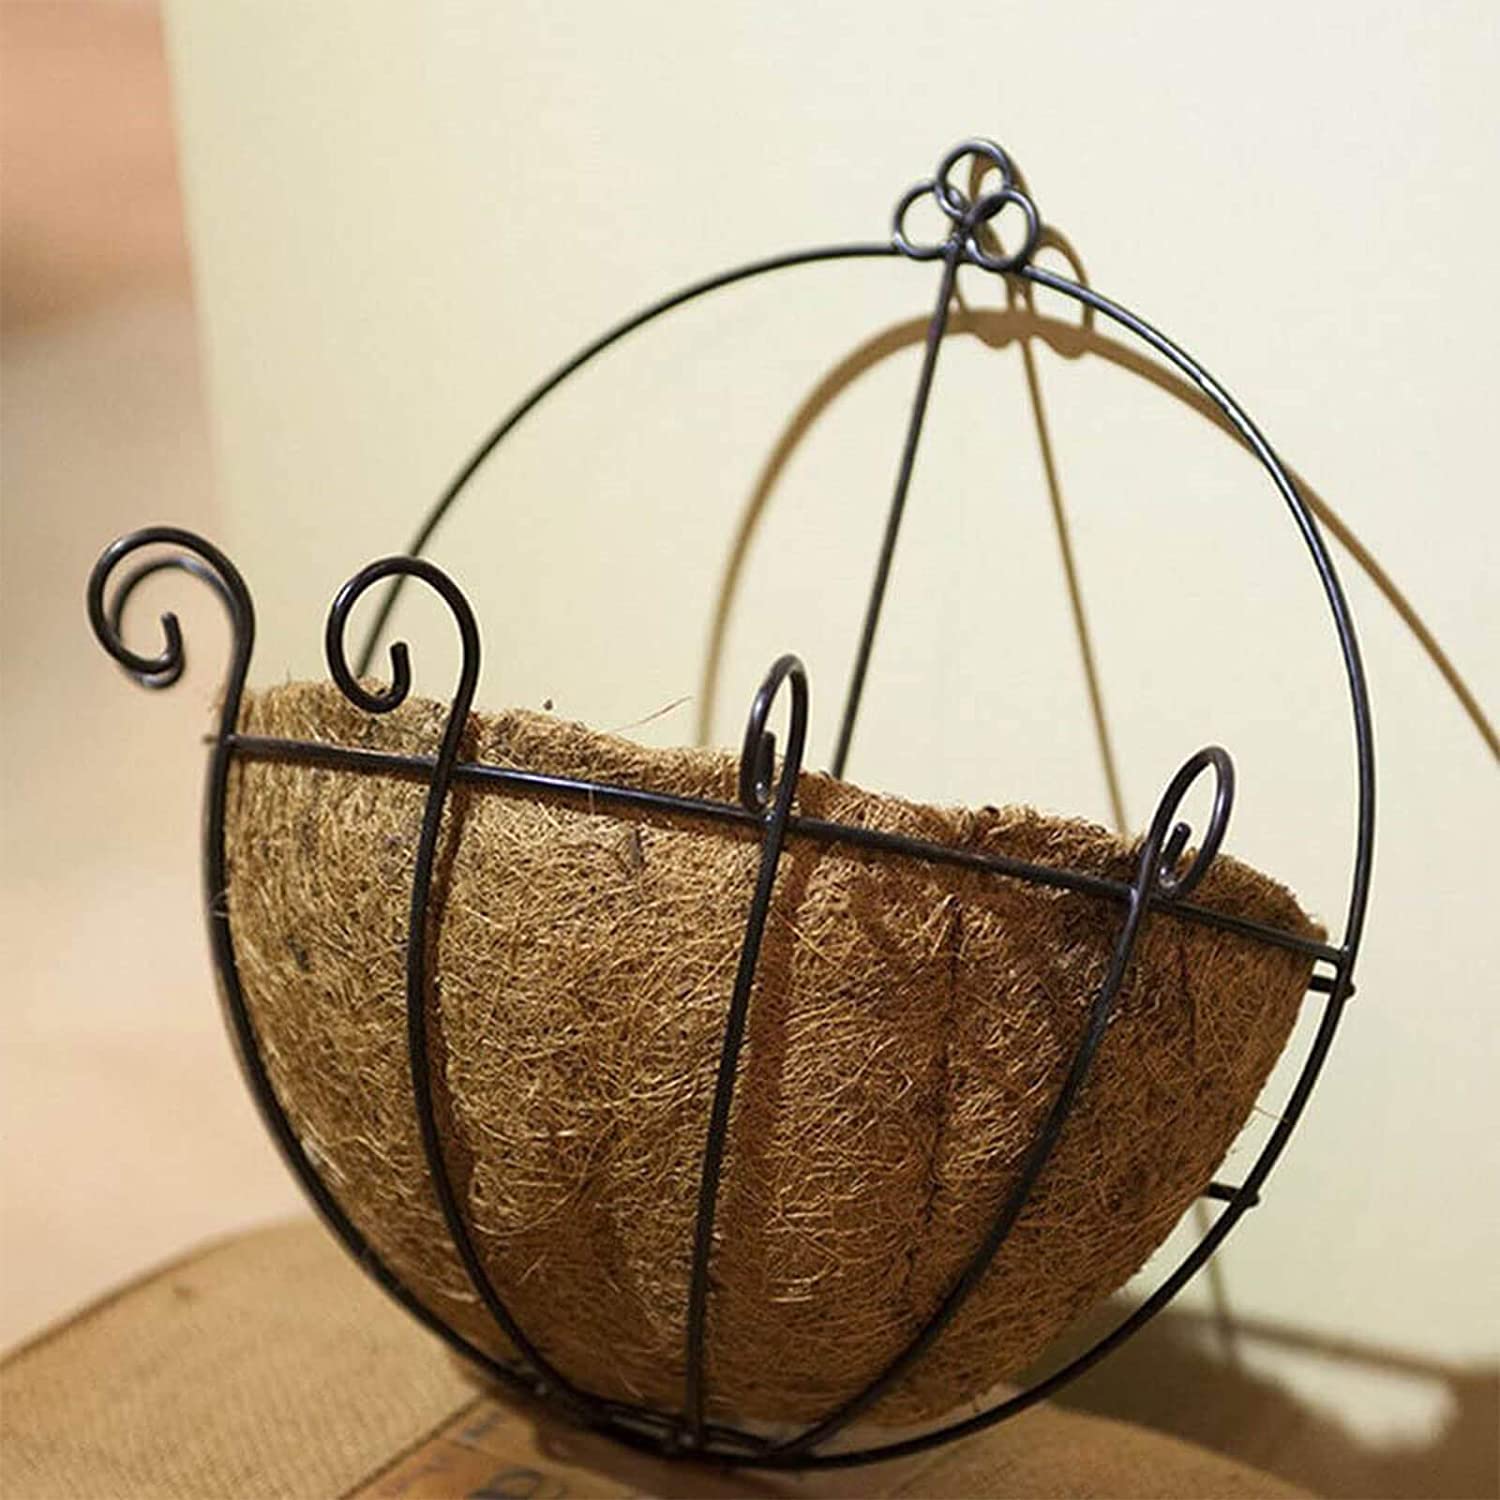 DS BS Iron Wall Hanging Half Round Planter